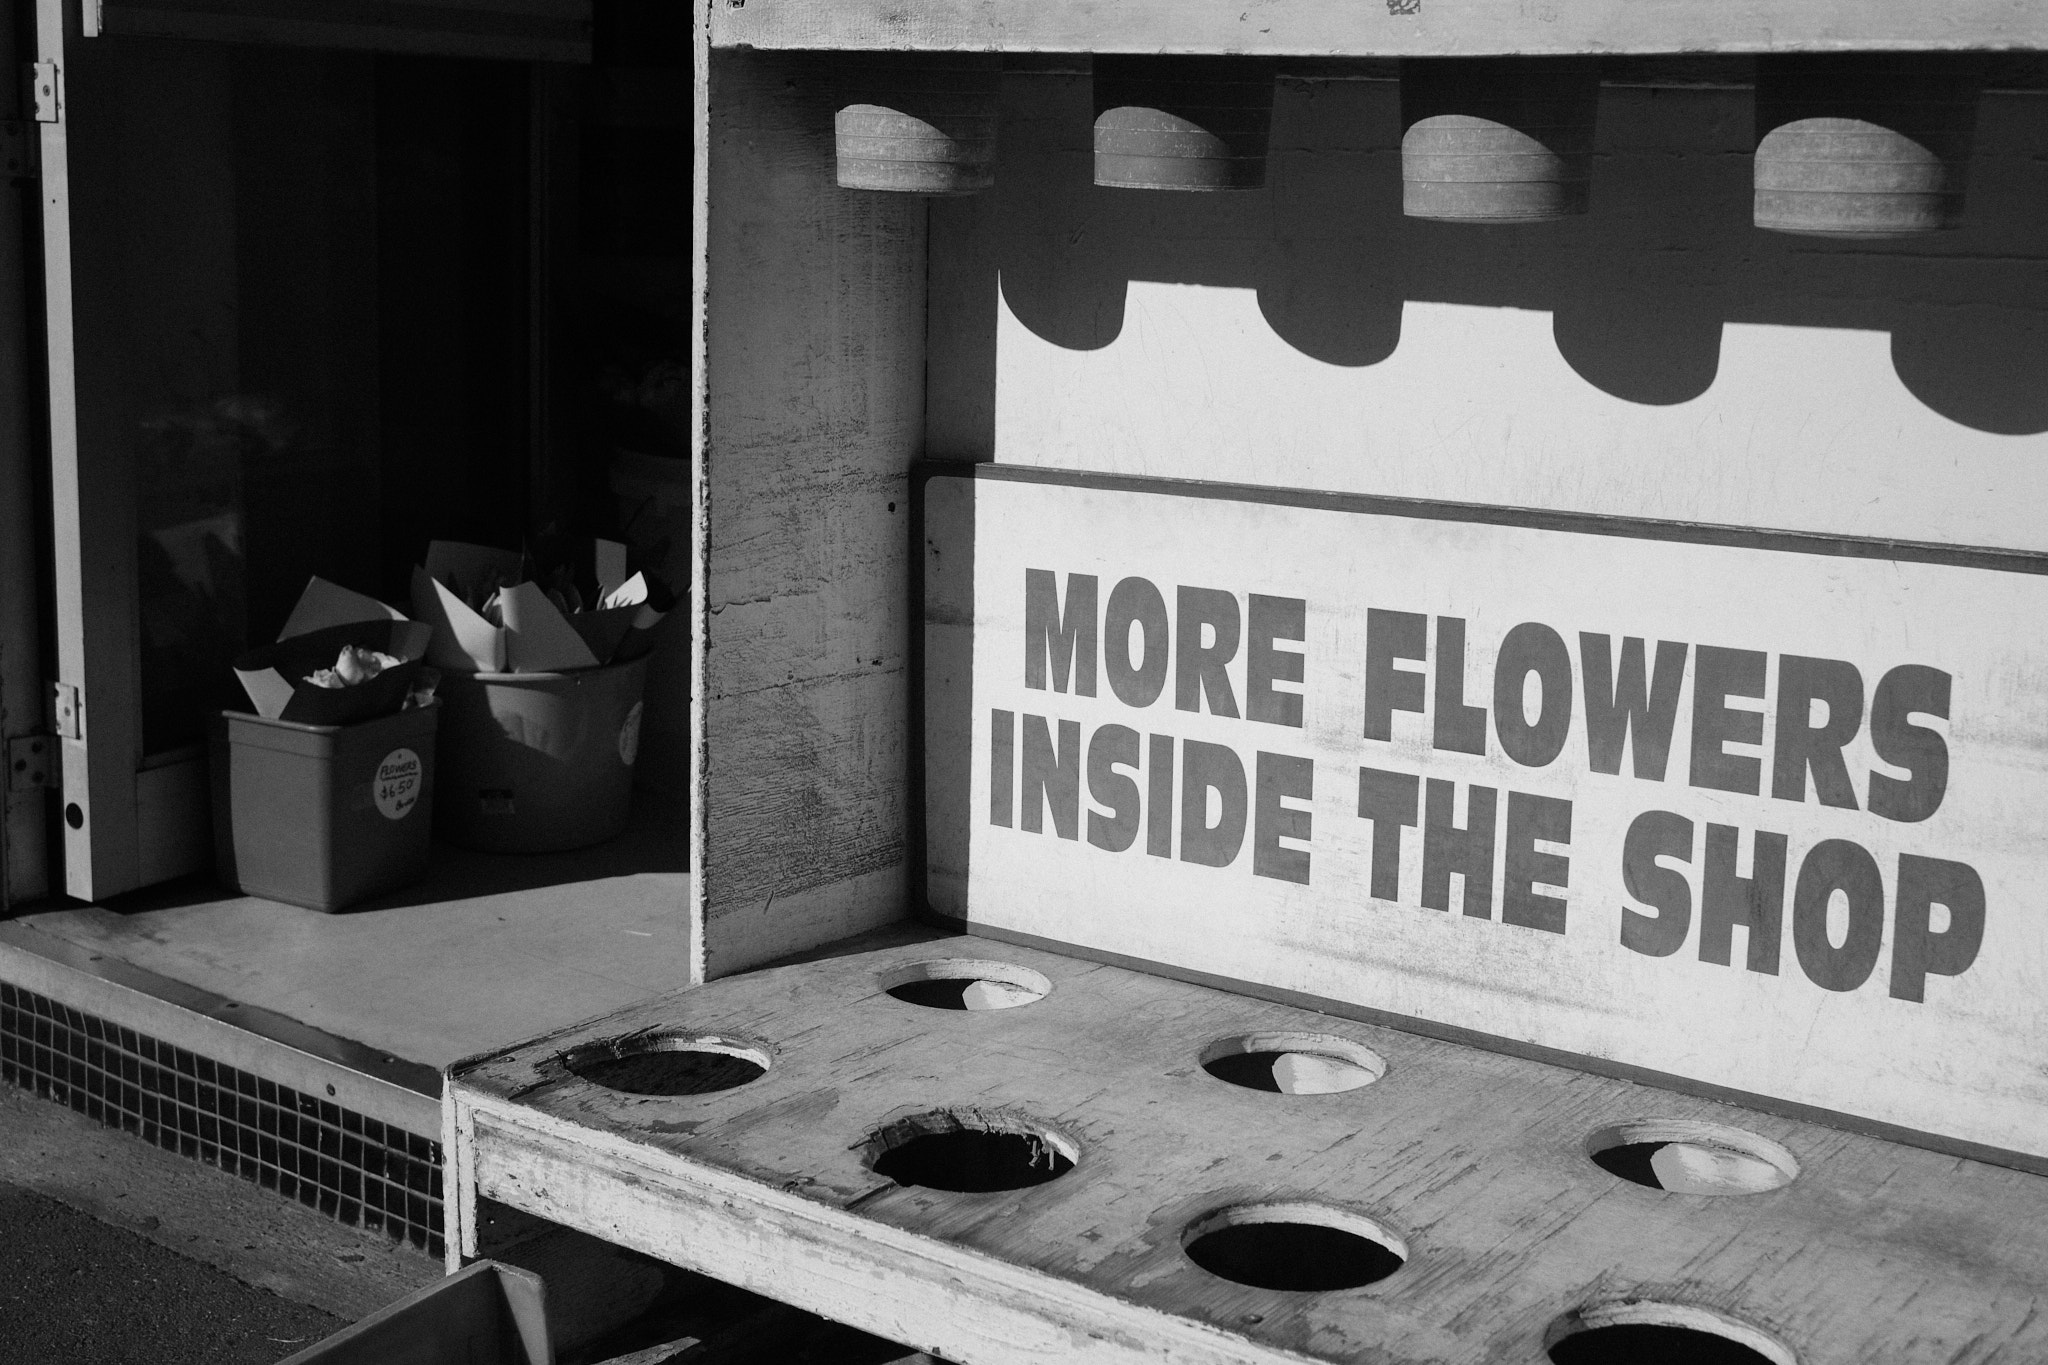 A sign reads 'More Flowers Inside the Shop' with a view of flowers peaking out of the doorway